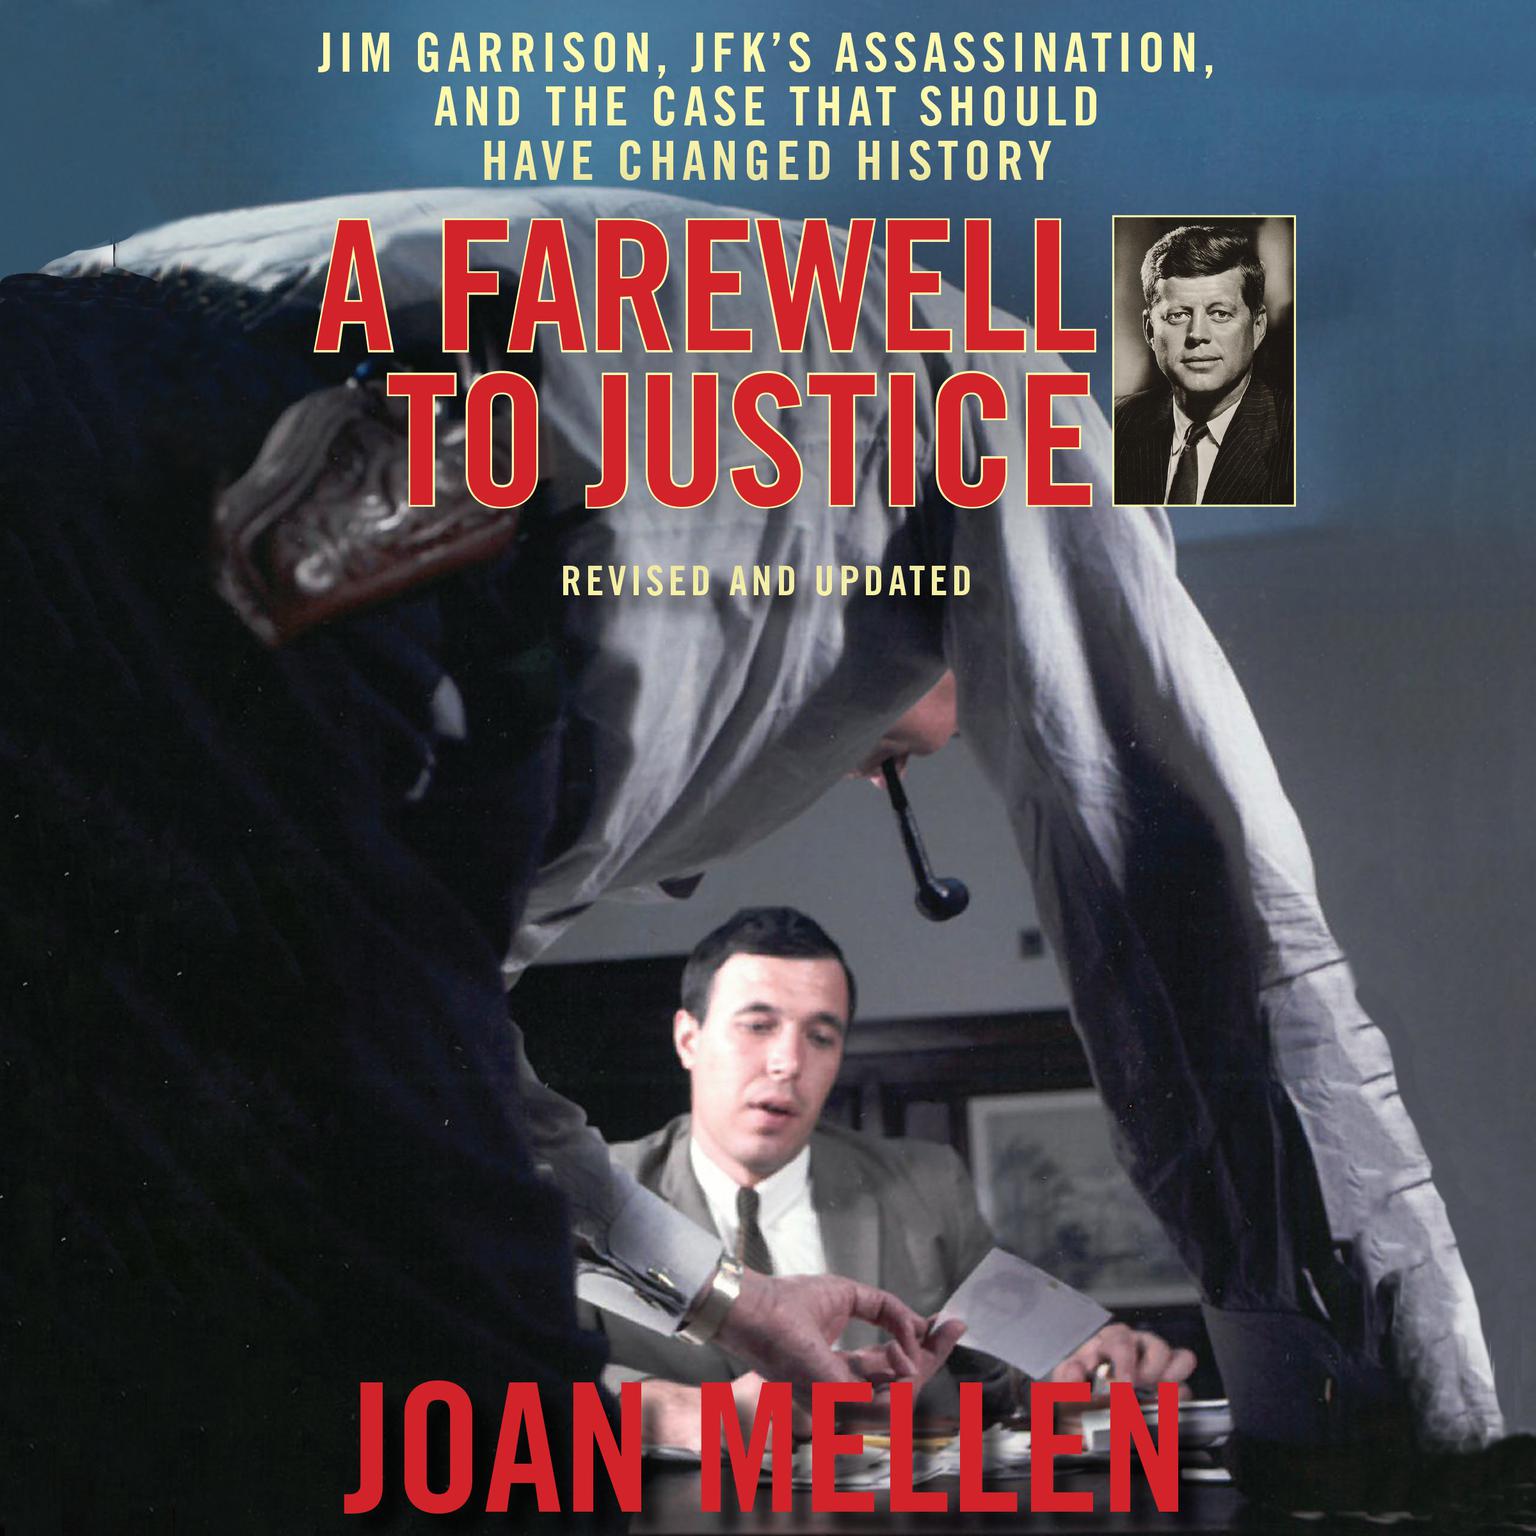 A Farewell to Justice: Jim Garrison, JFKs Assassination, and the Case That Should Have Changed History Audiobook, by Joan Mellen